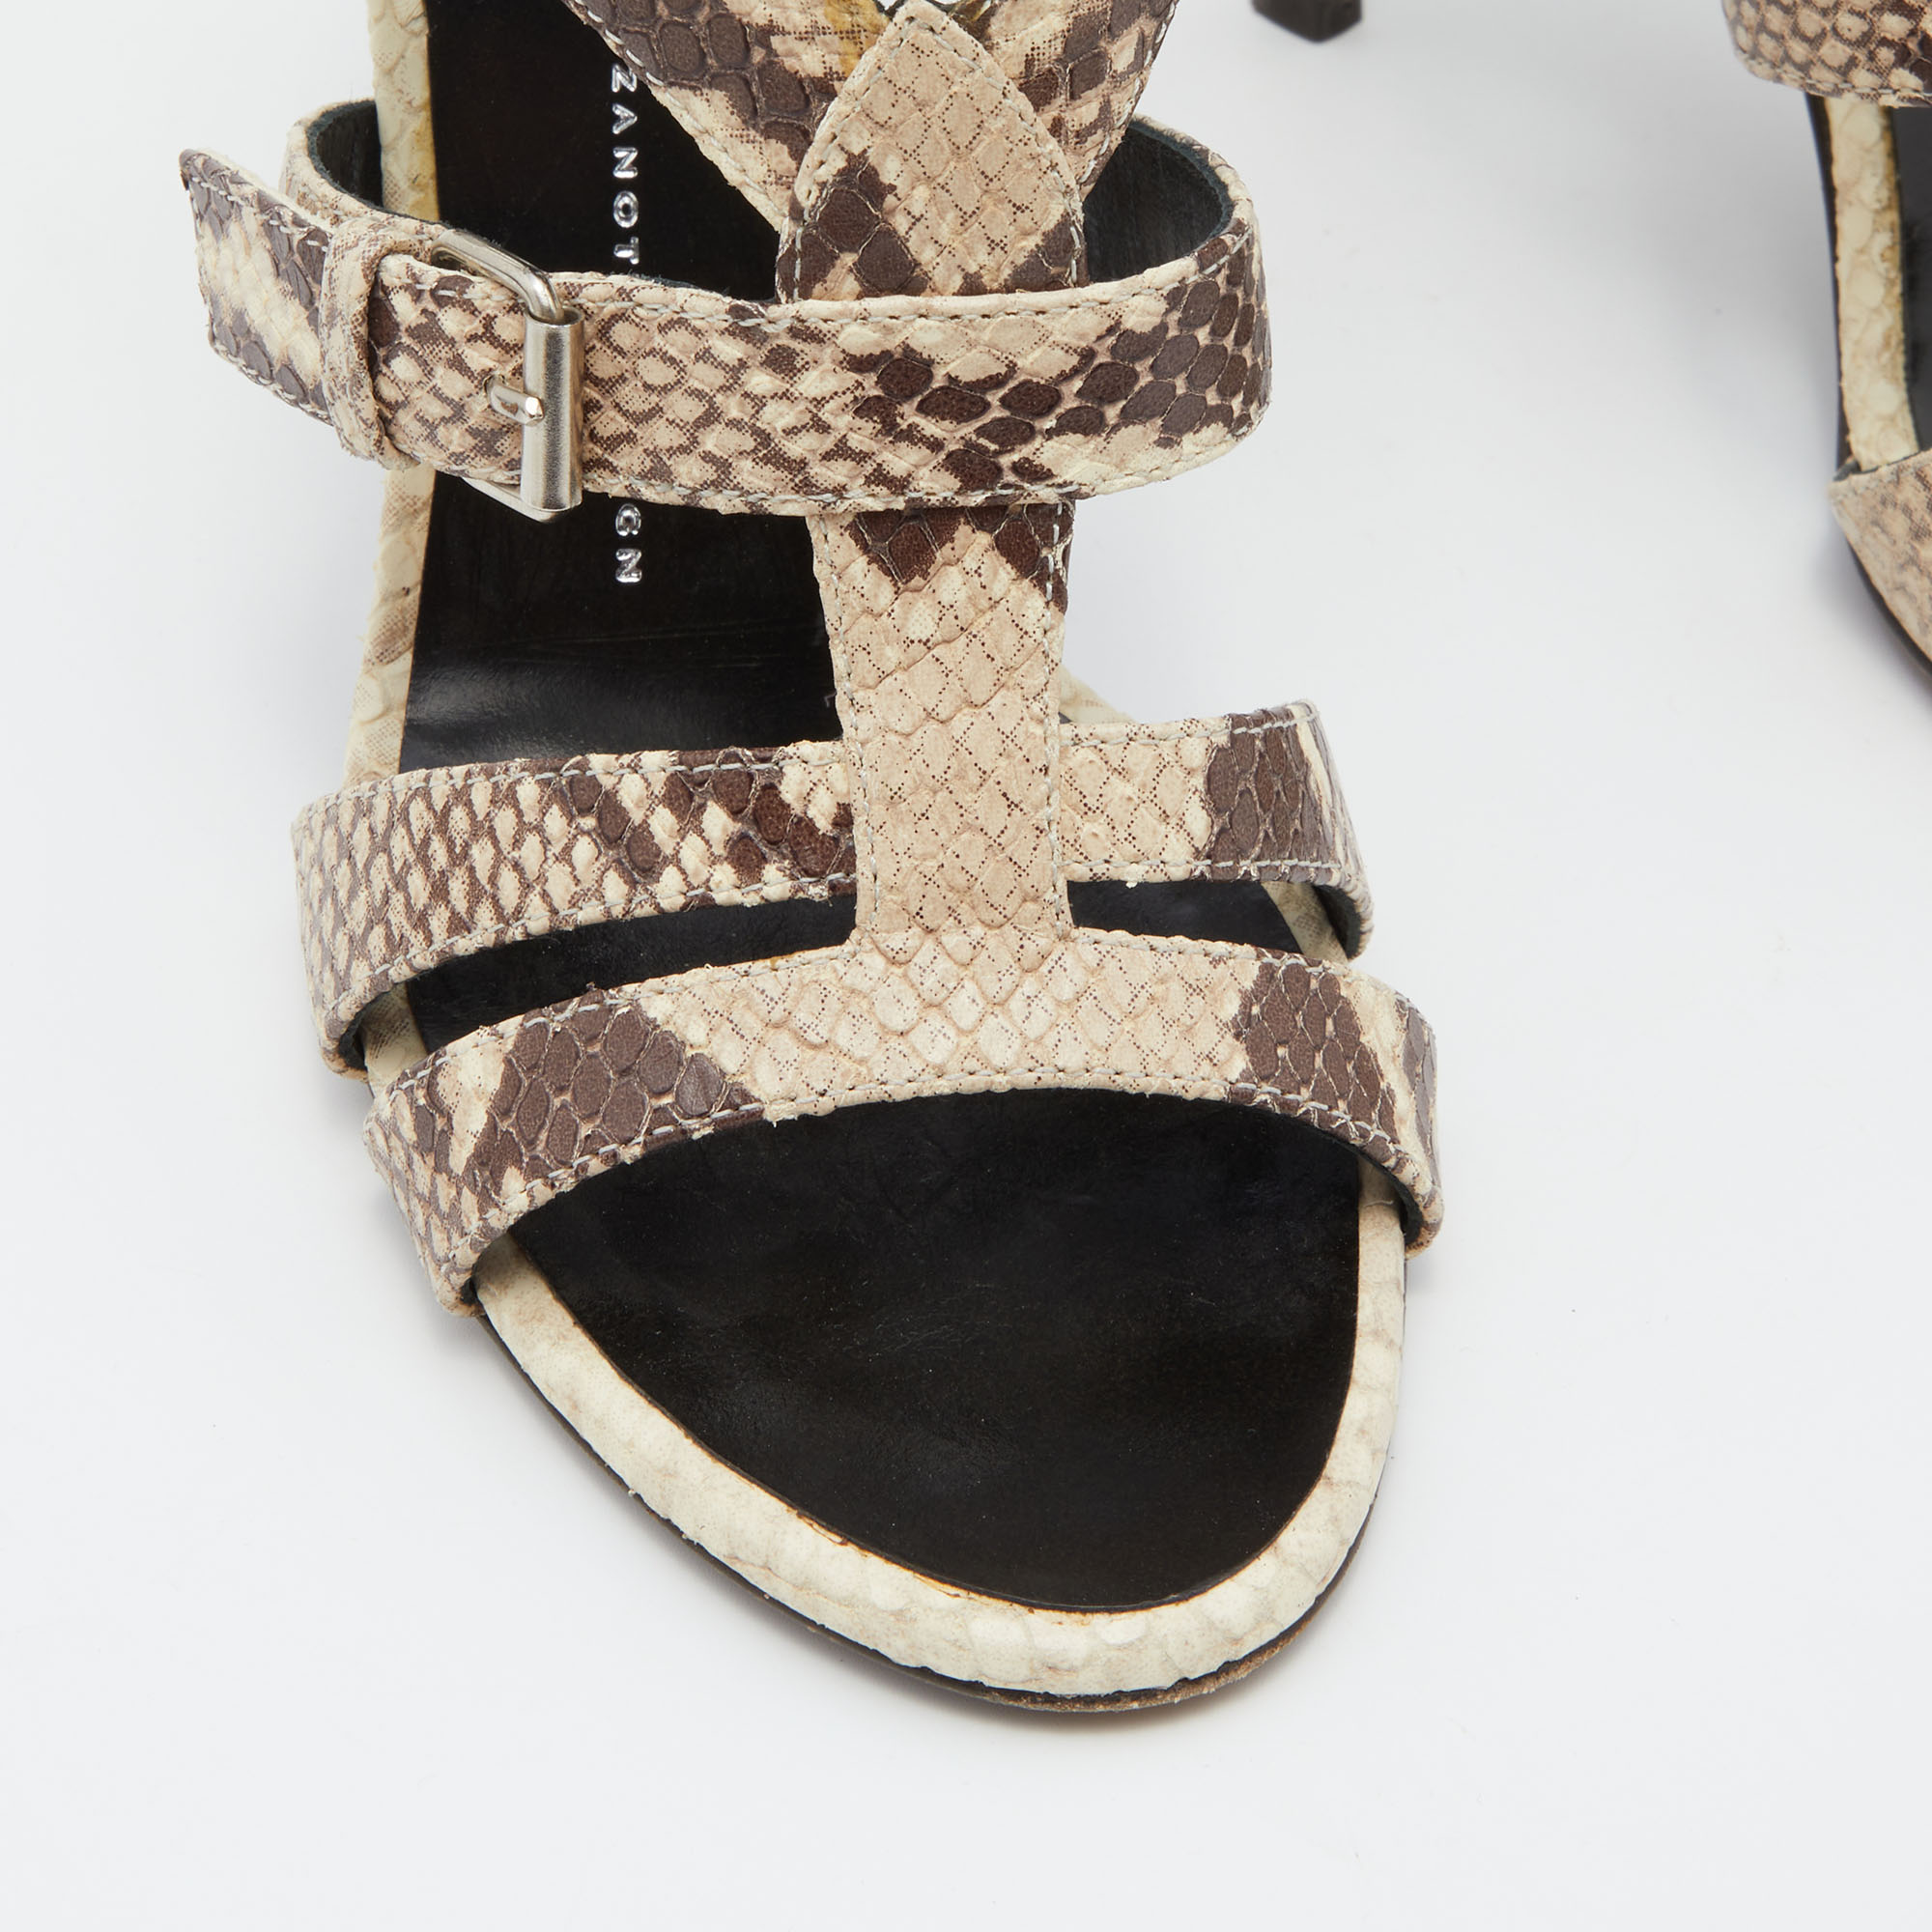 Giuseppe Zanotti Off White/Brown Python Embossed Leather Strappy Sandals Size 38